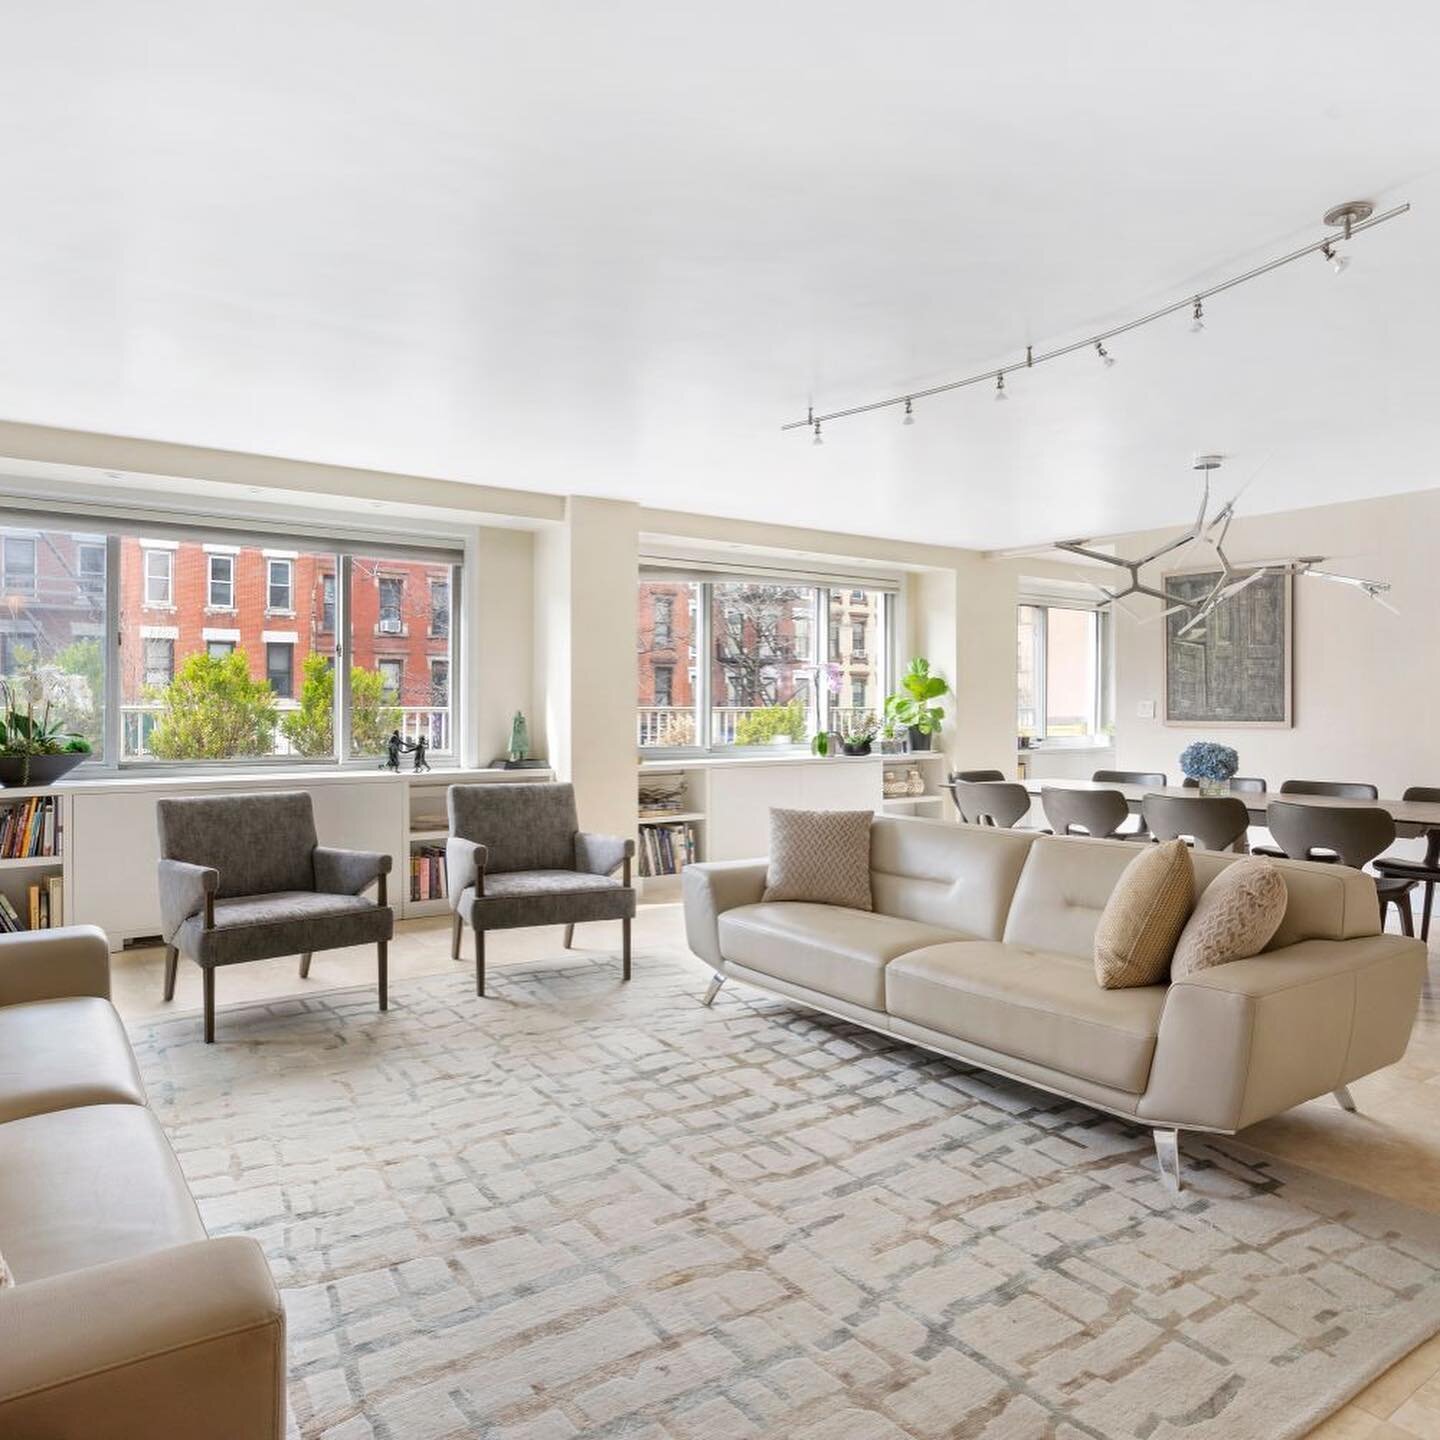 Just Listed! Rarely available, renovated, and sun-flooded 5 bedroom, 5.5 bath home with the perfect duplex layout!

401 East 86th Street, #2HJ/3J
&bull; 5 Bedroom
&bull; 5.5 Bathroom
&bull; Sold for $3,295,000

Contact us directly for more informatio